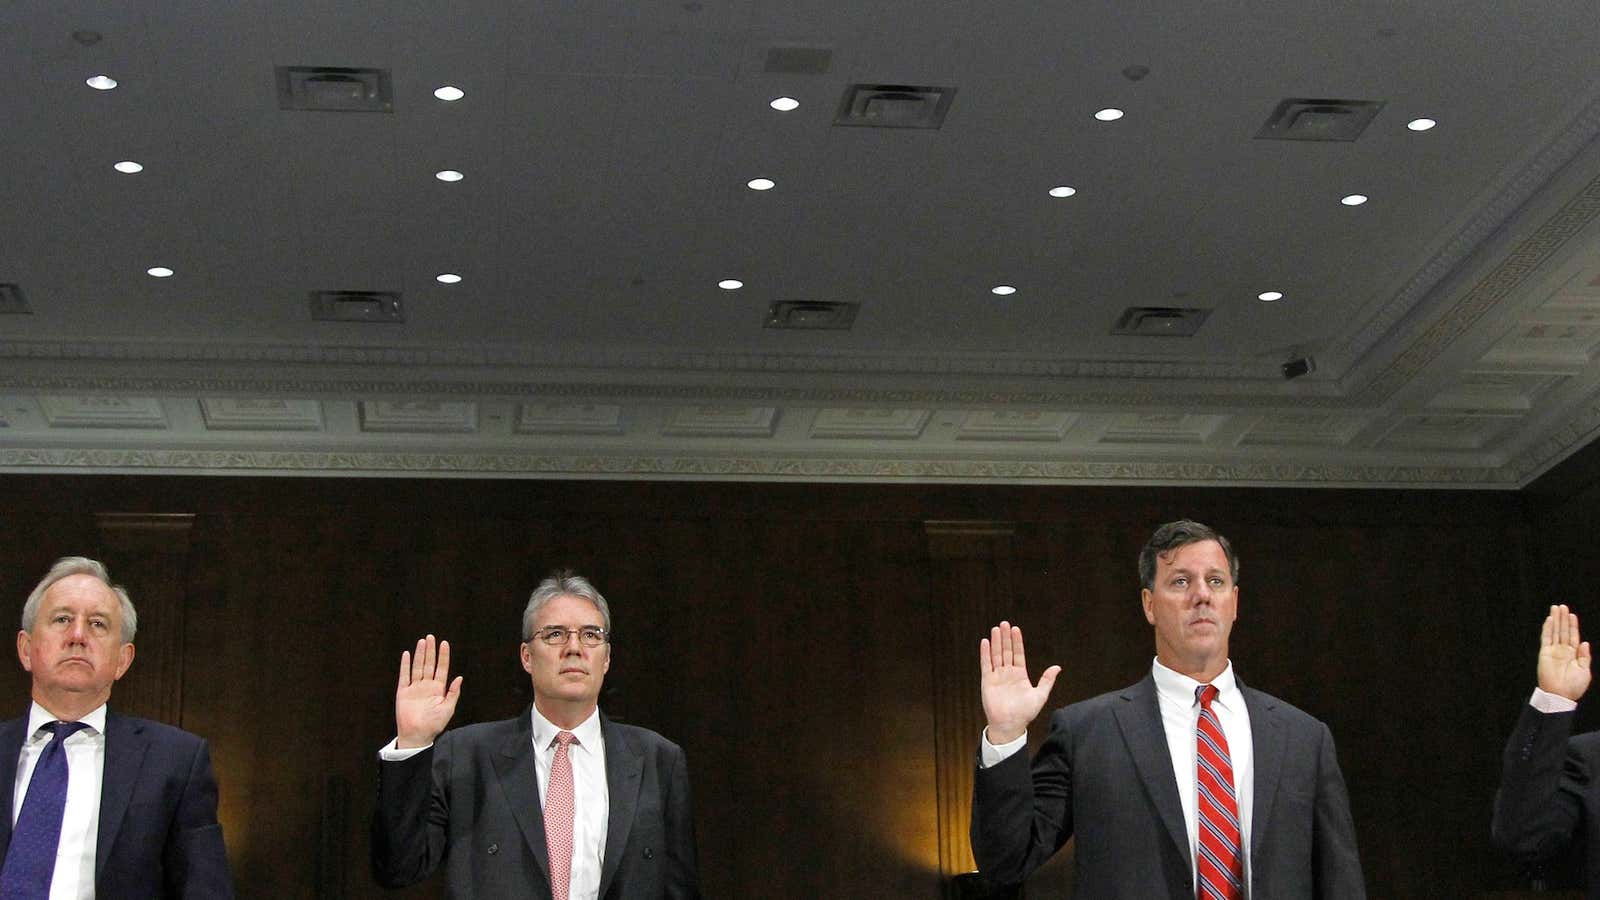 Raise your hand if your company is paying a fine after a money-laundering probe.